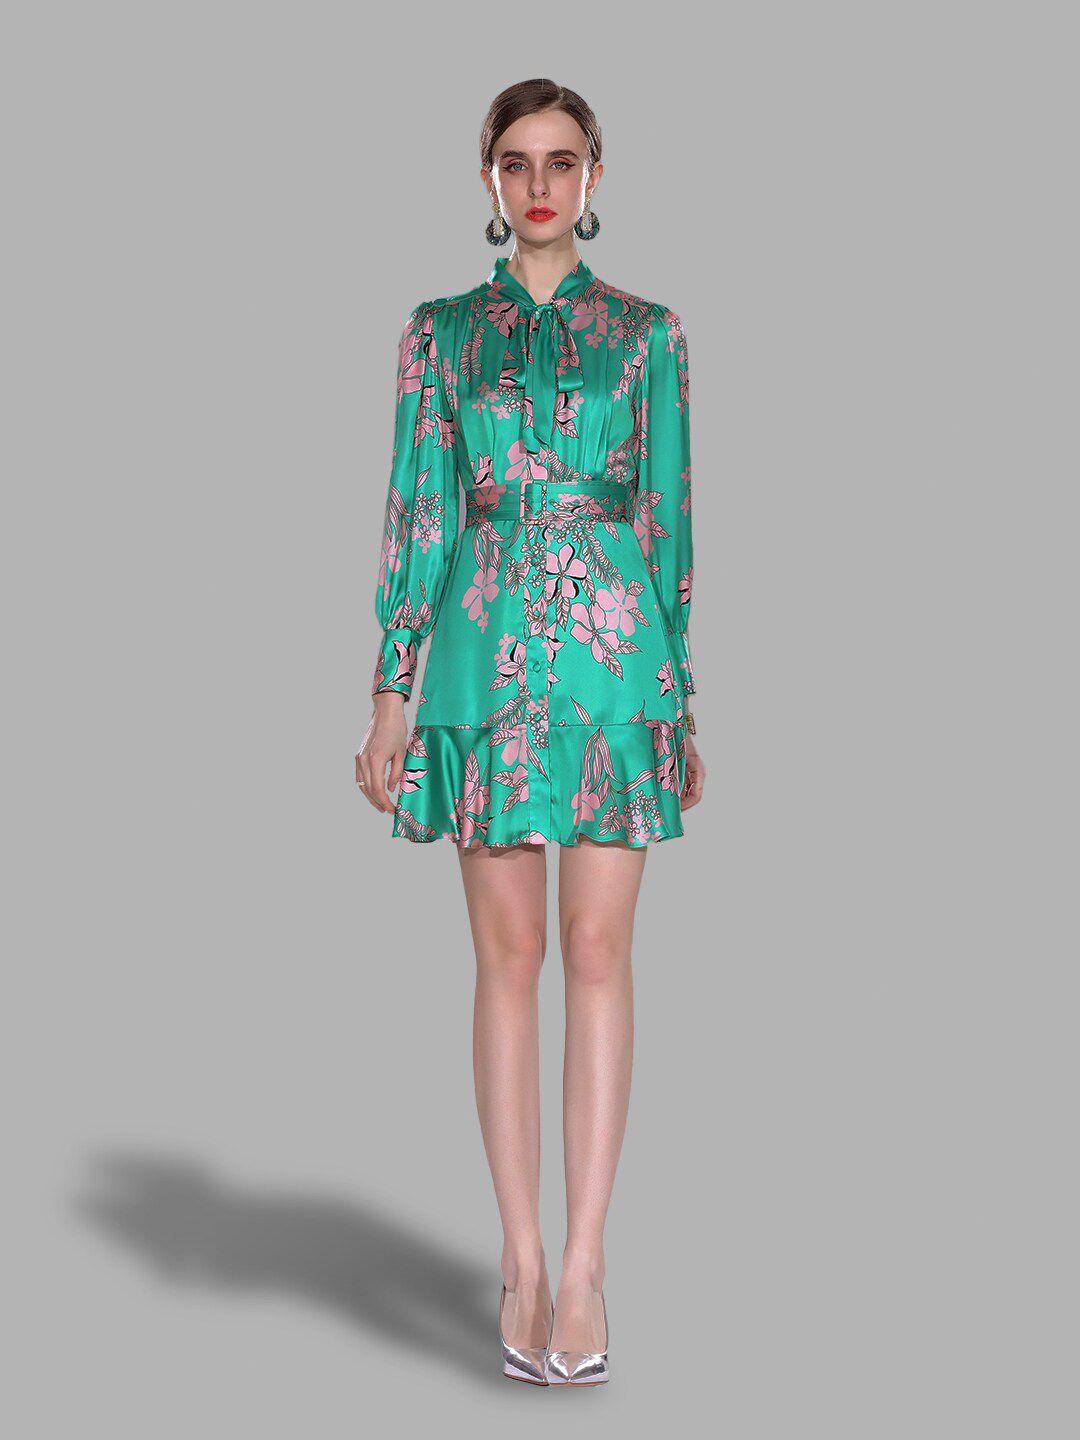 jc collection green floral tie-up neck shirt dress